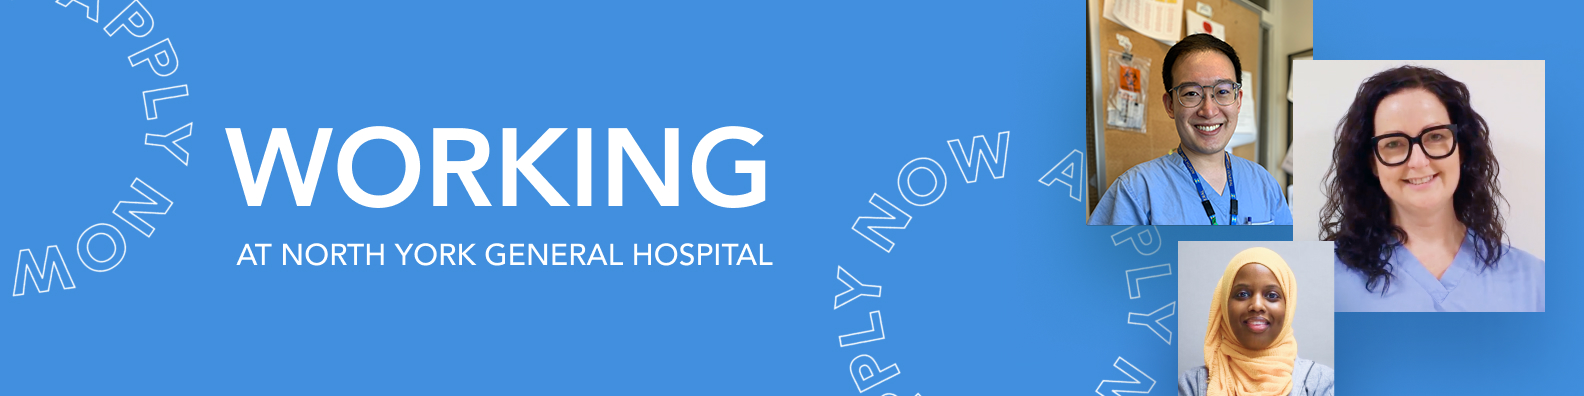 Working at North York General Hospital: Apply Now